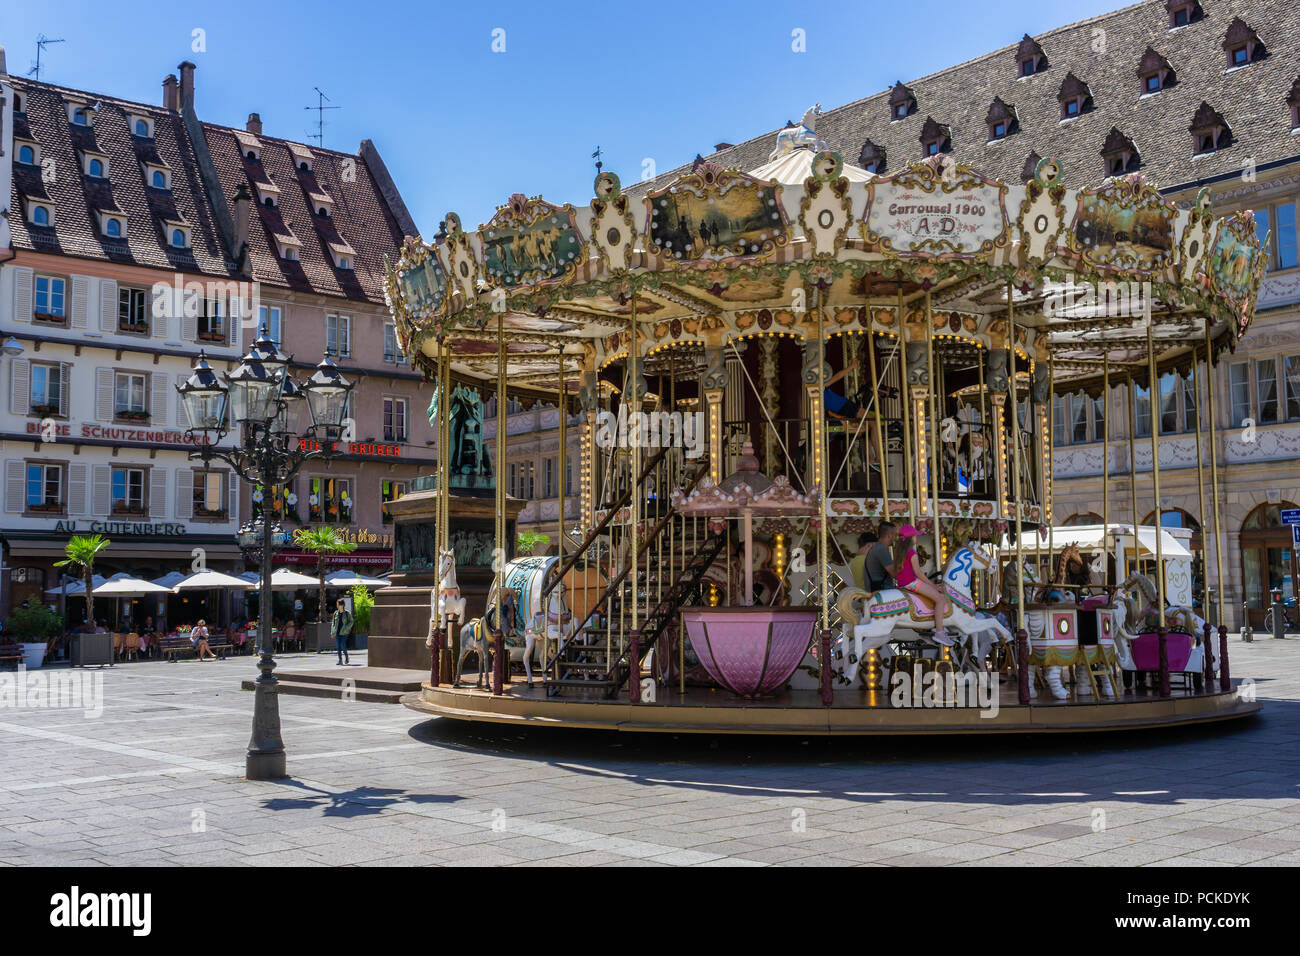 Johannes Gutenberg square with the old carousel in a beautiful day of summer in Strasbourg, France. Stock Photo